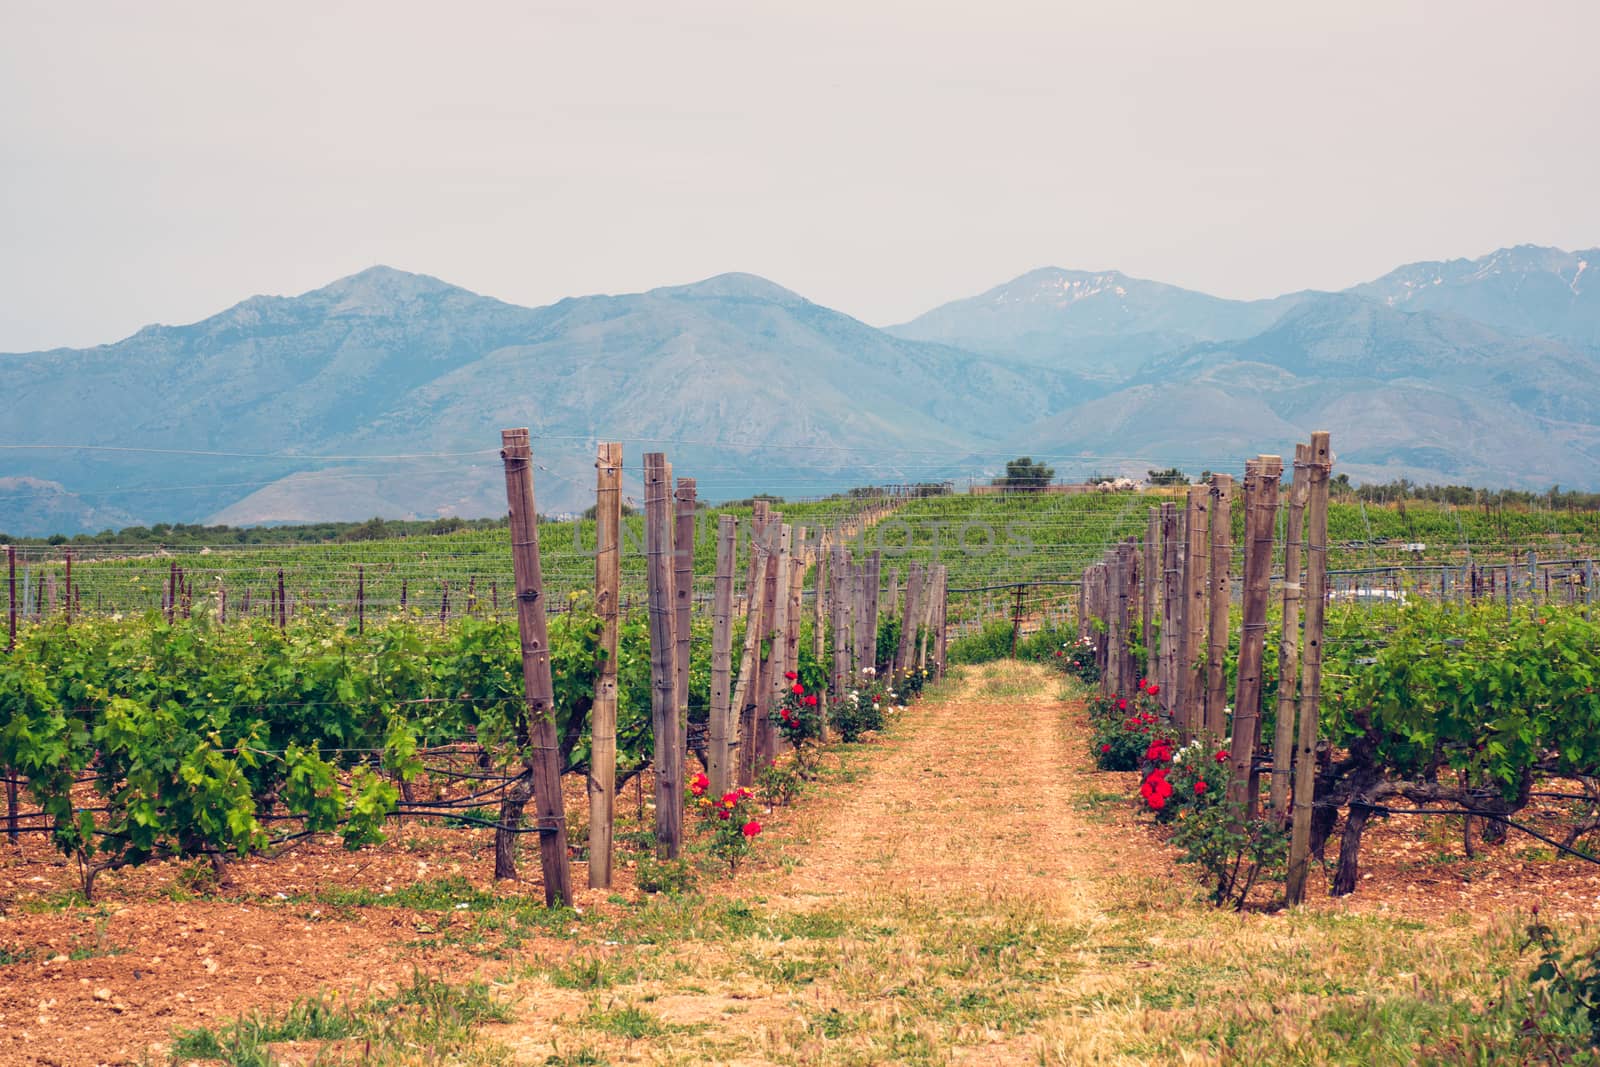 Wineyard with grape rows by dimol